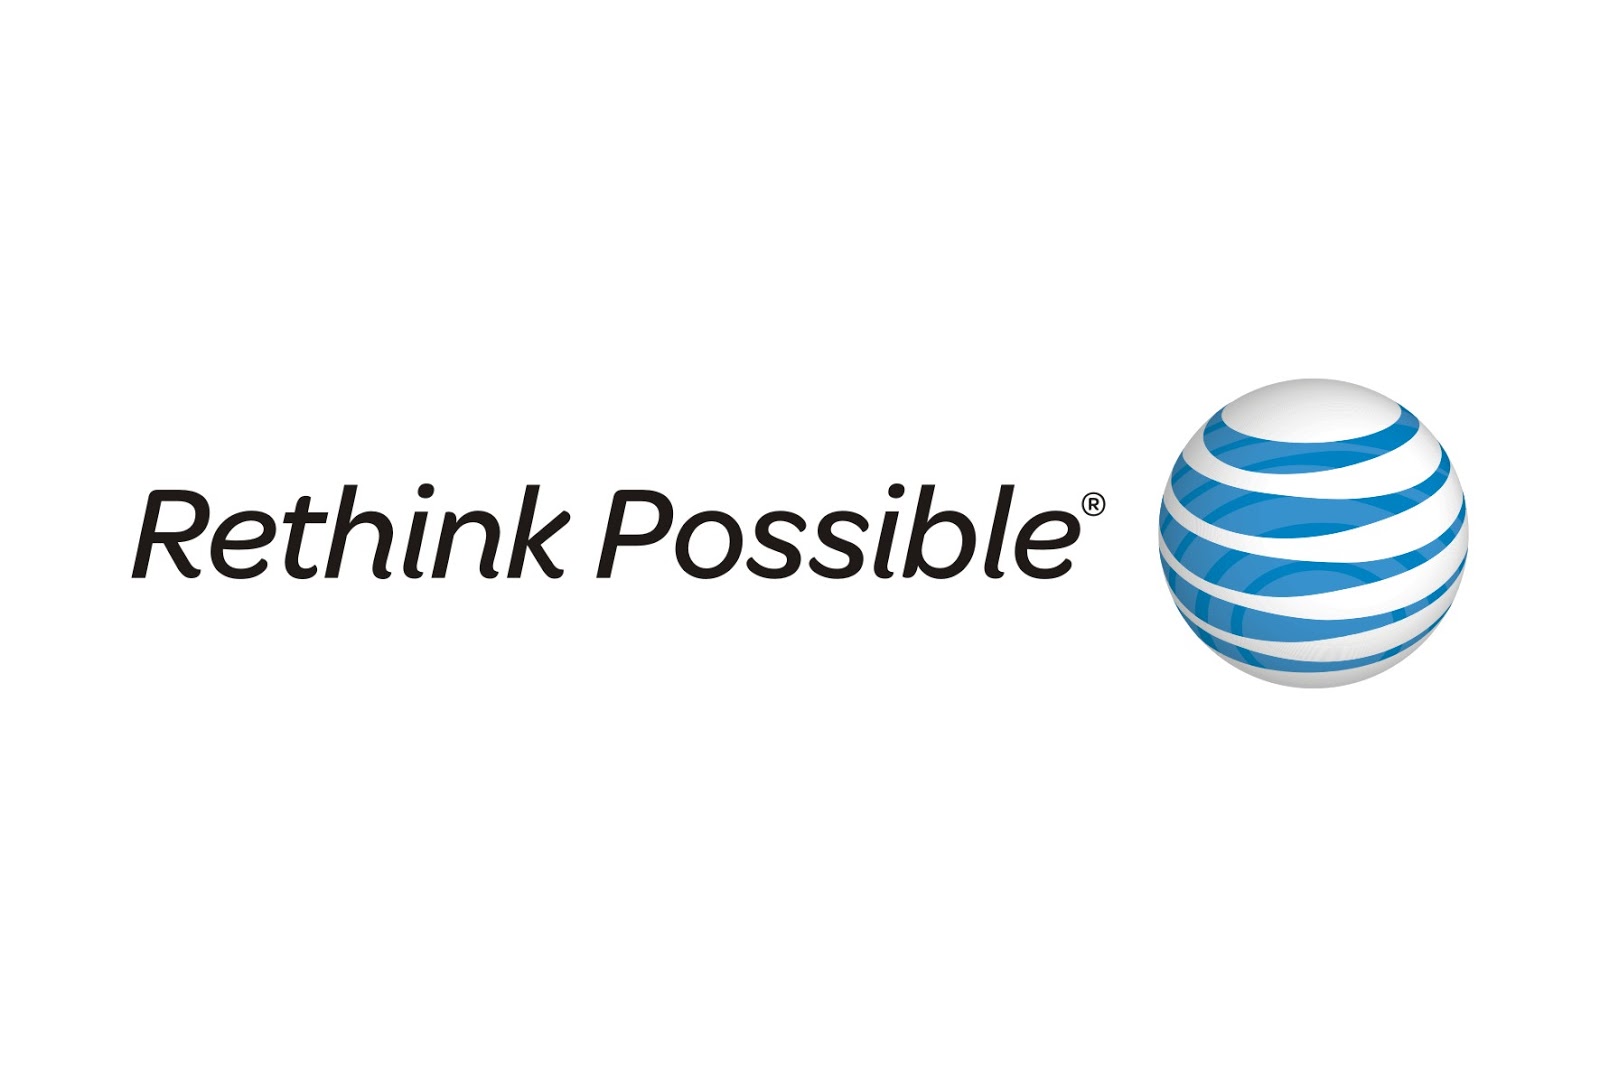 rethink possible at&t png logo #3356